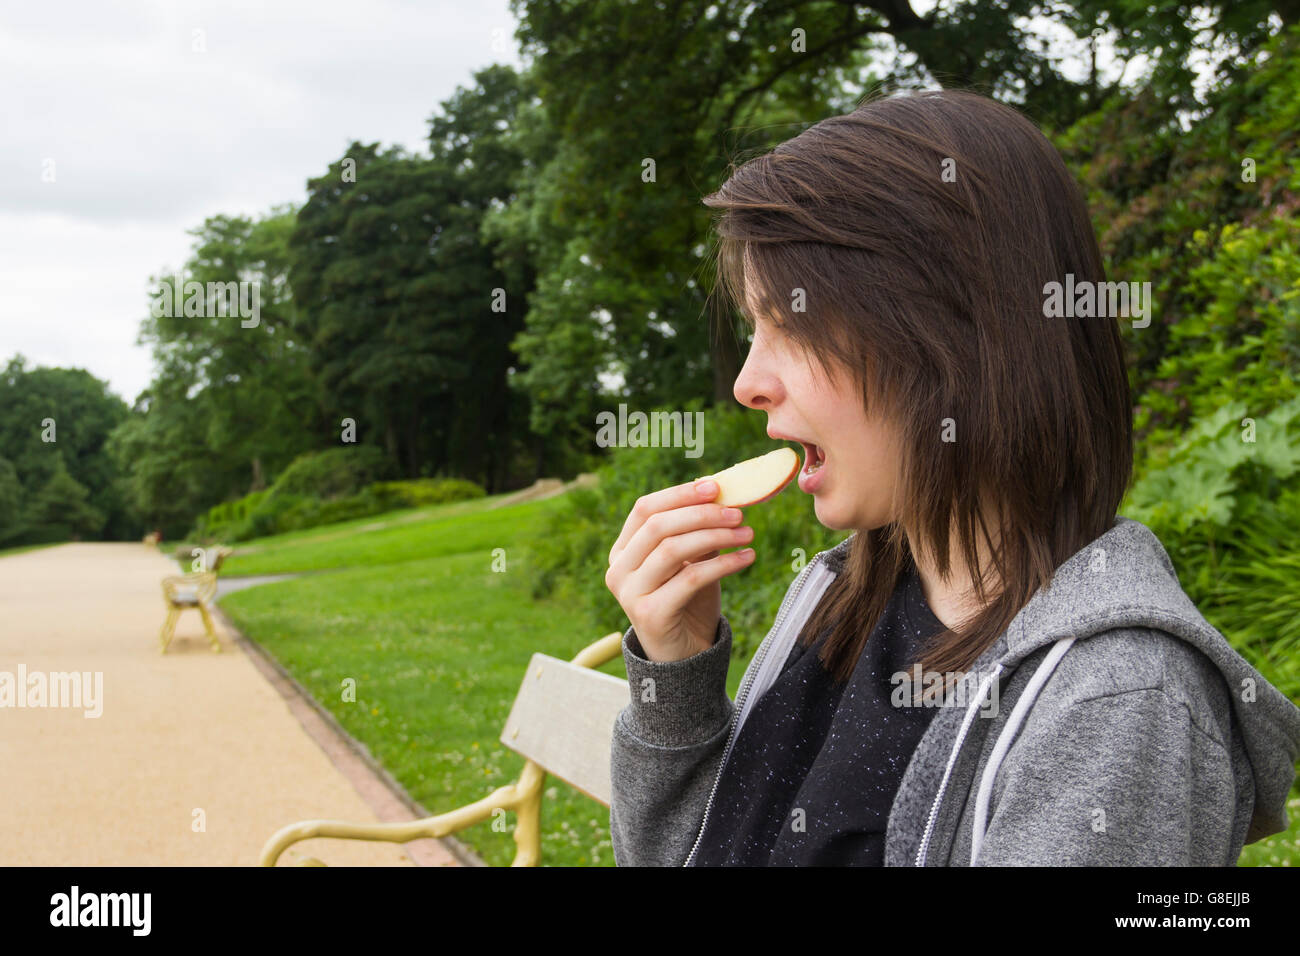 Young  woman, adult or late teens, seated in park eating a slice of apple. Stock Photo